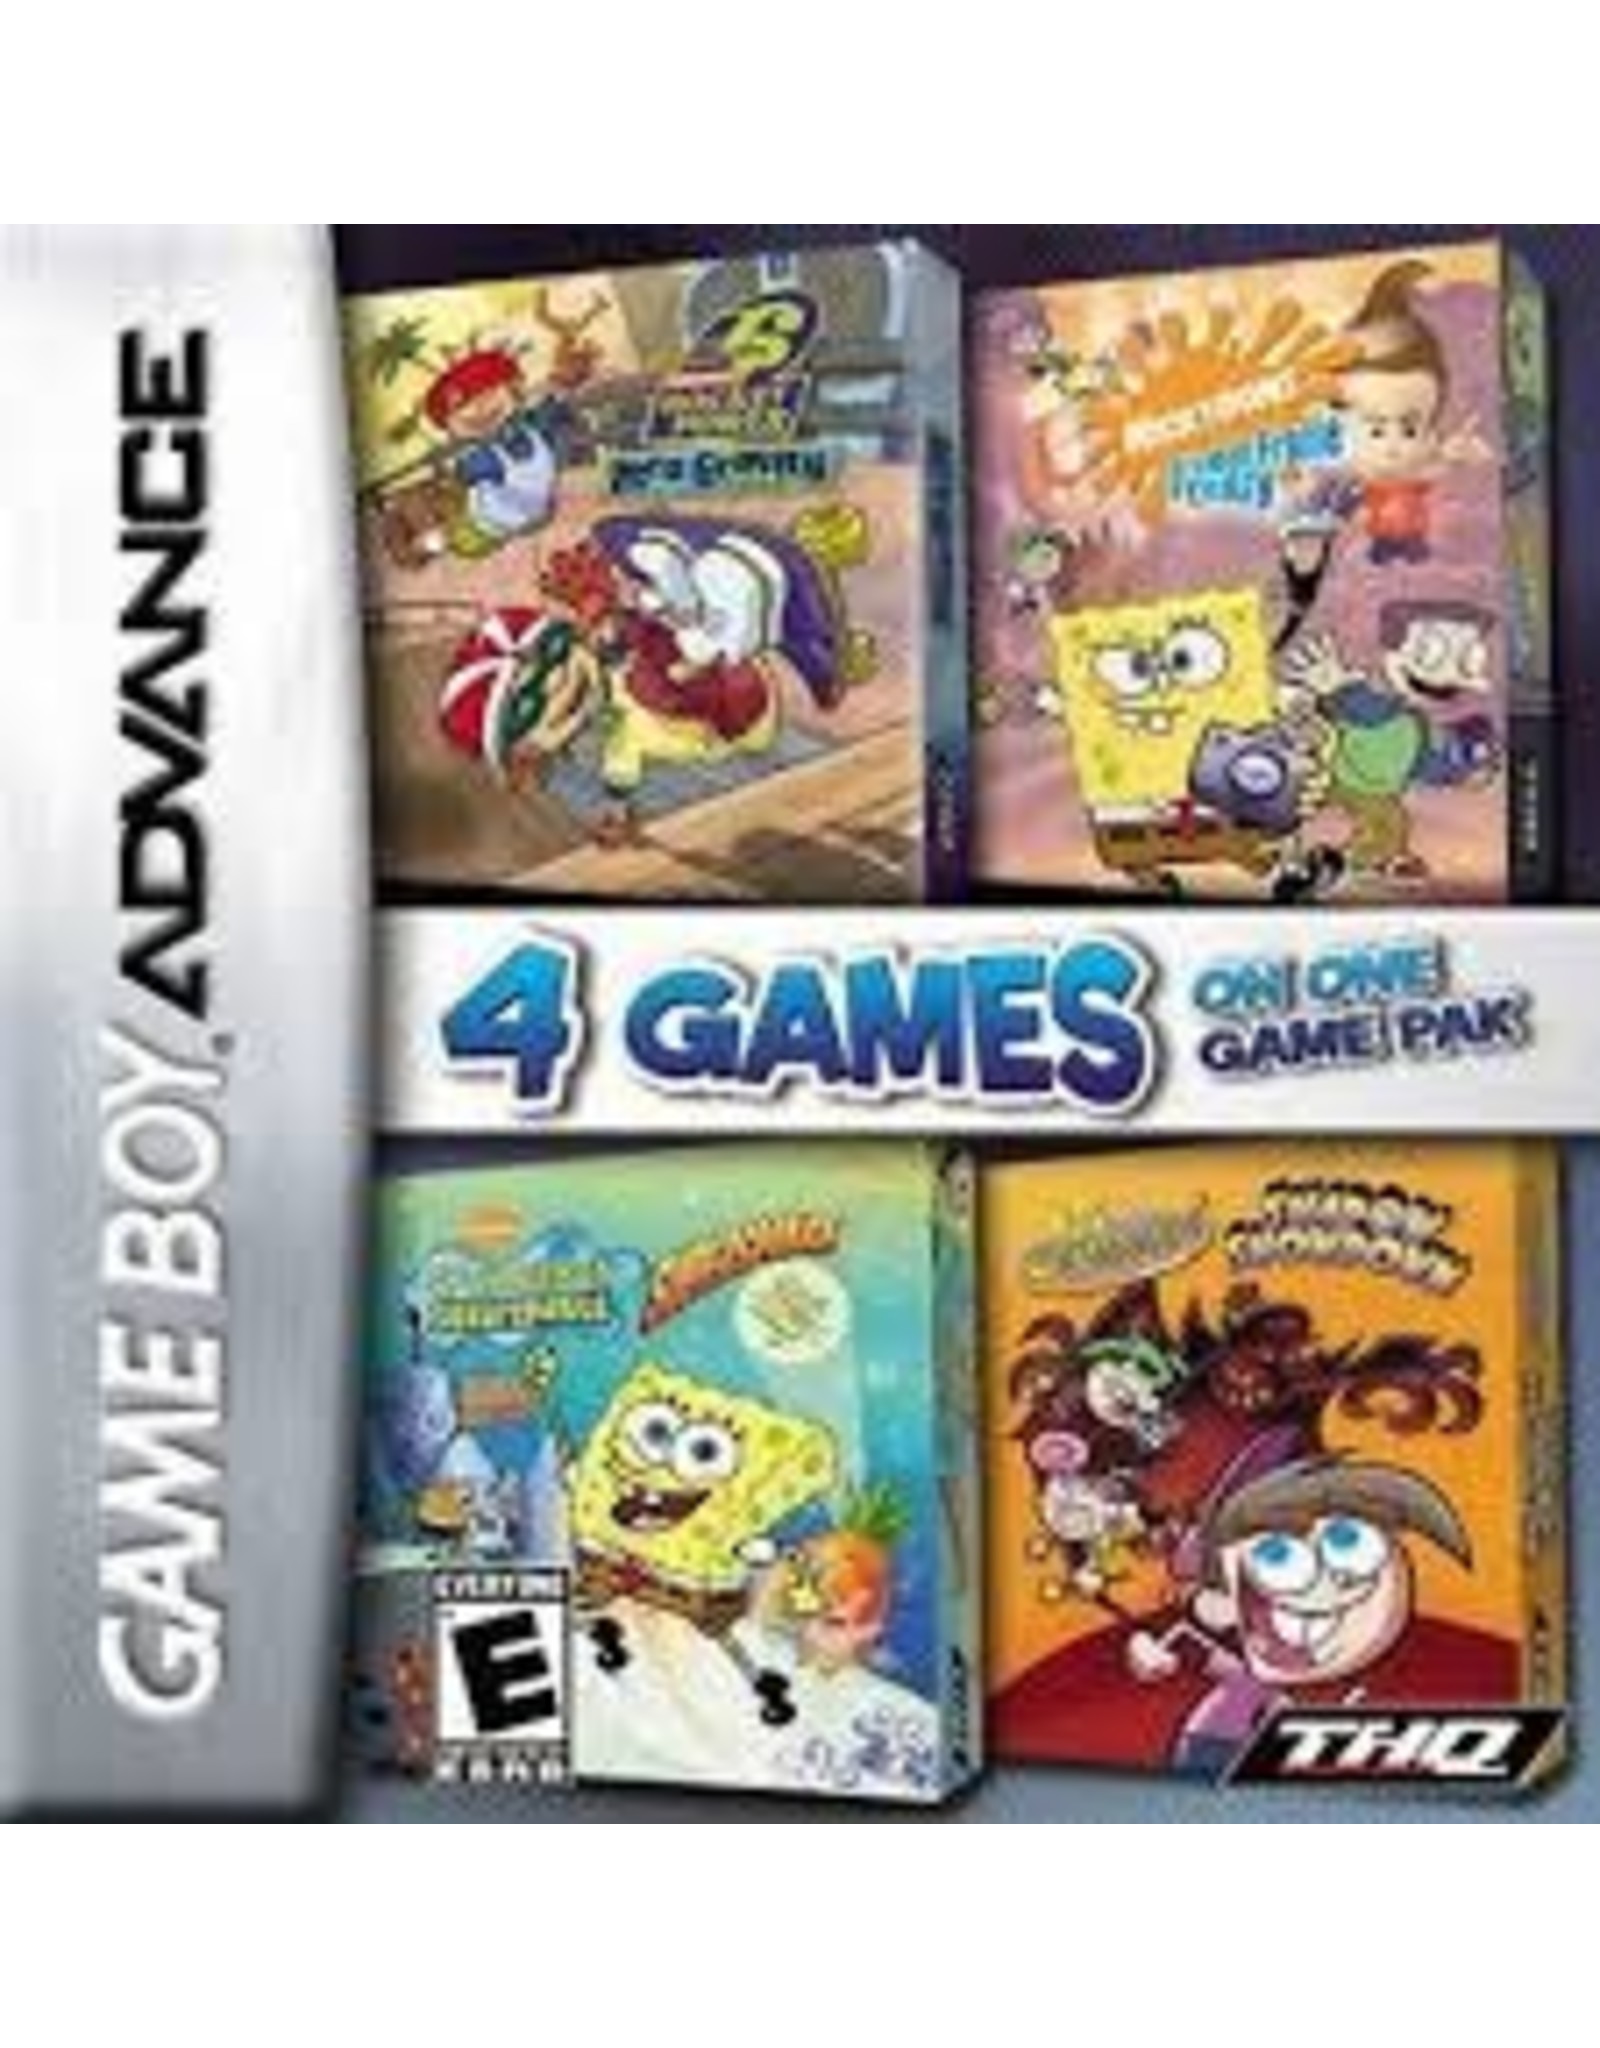 Game Boy Advance Nickelodeon Four Game Pack (Used, Cart Only)